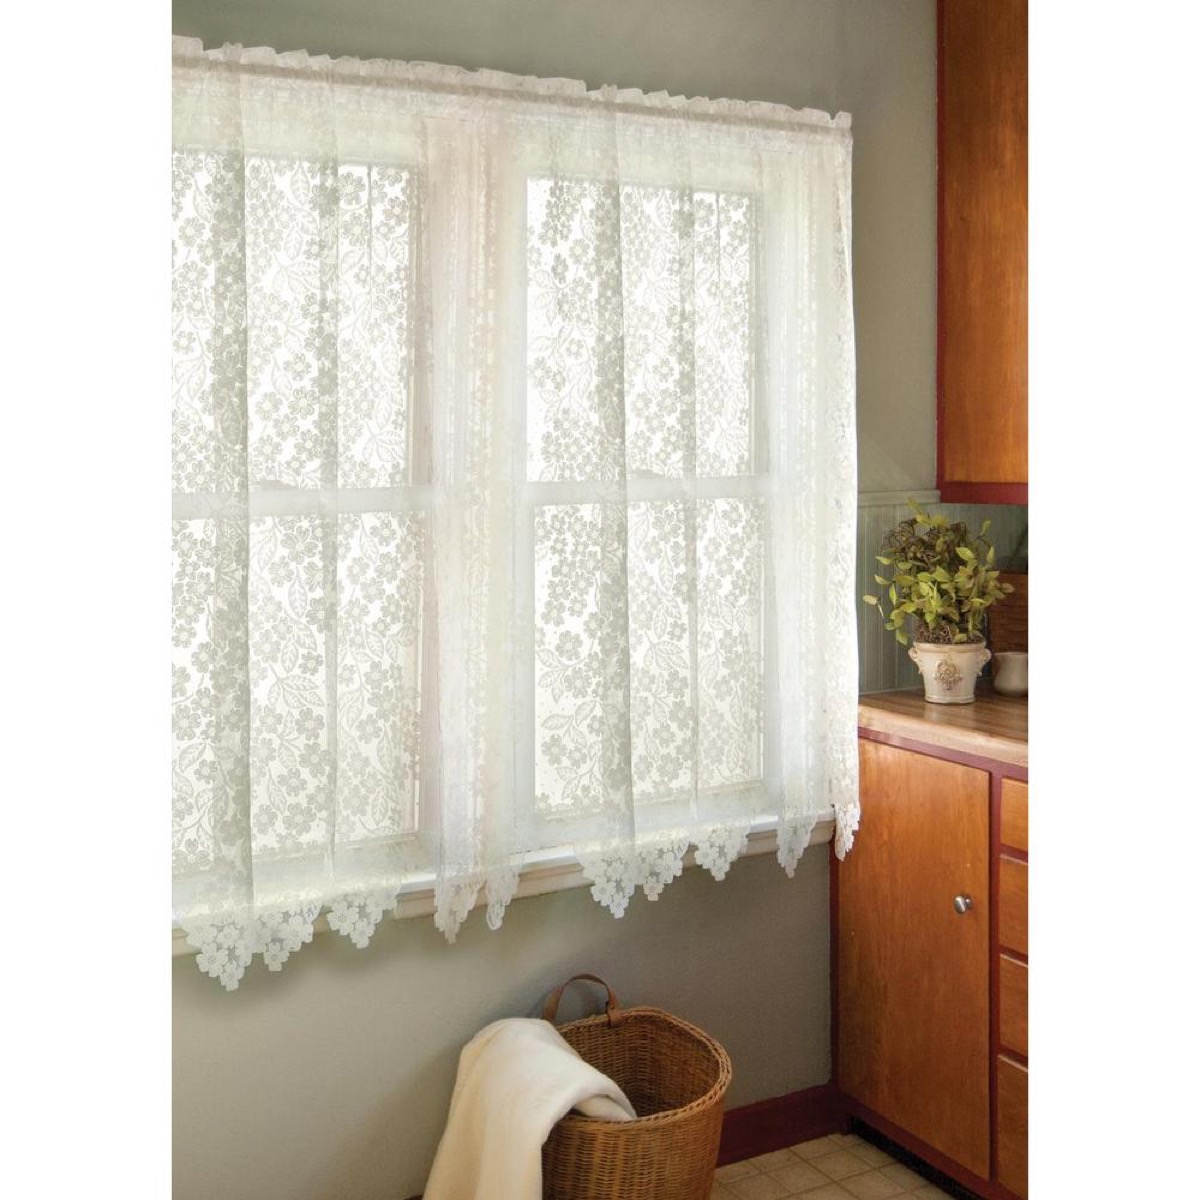 white lace curtains, old fashioned home items